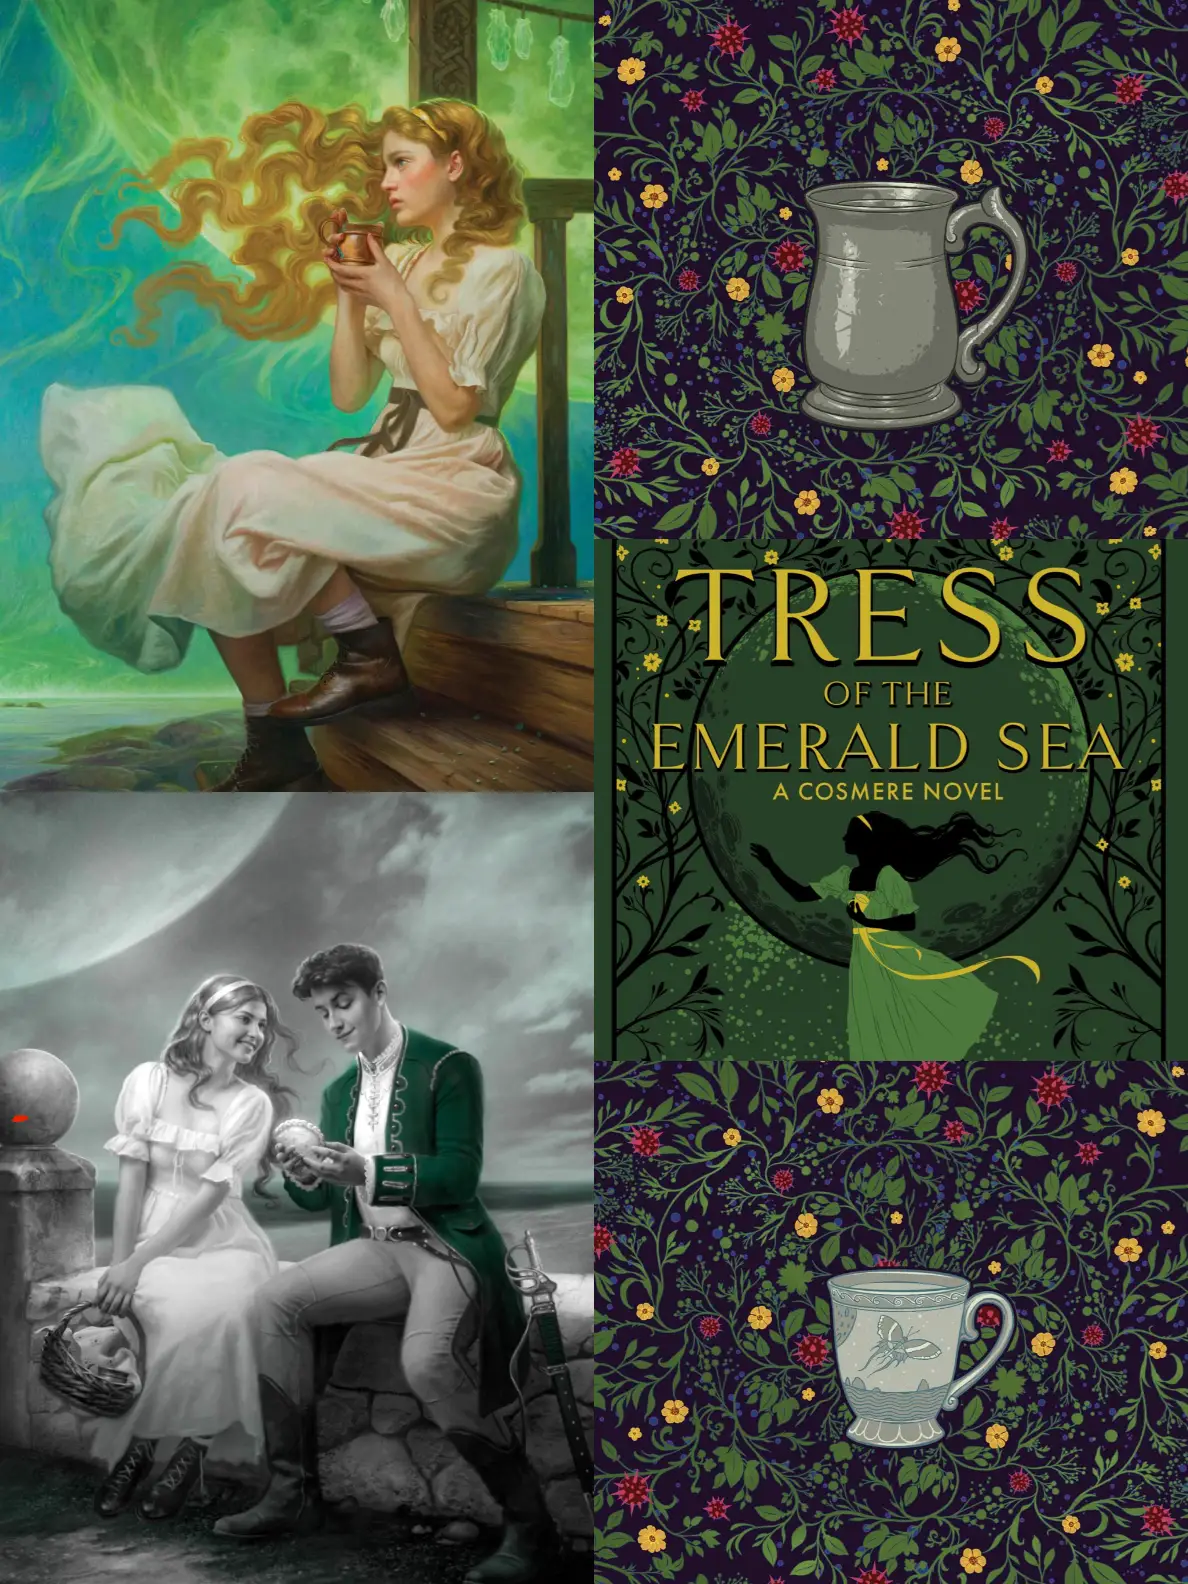 Tress of the Emerald Sea: A Cosmere Novel (Secret Projects Book 1) See more